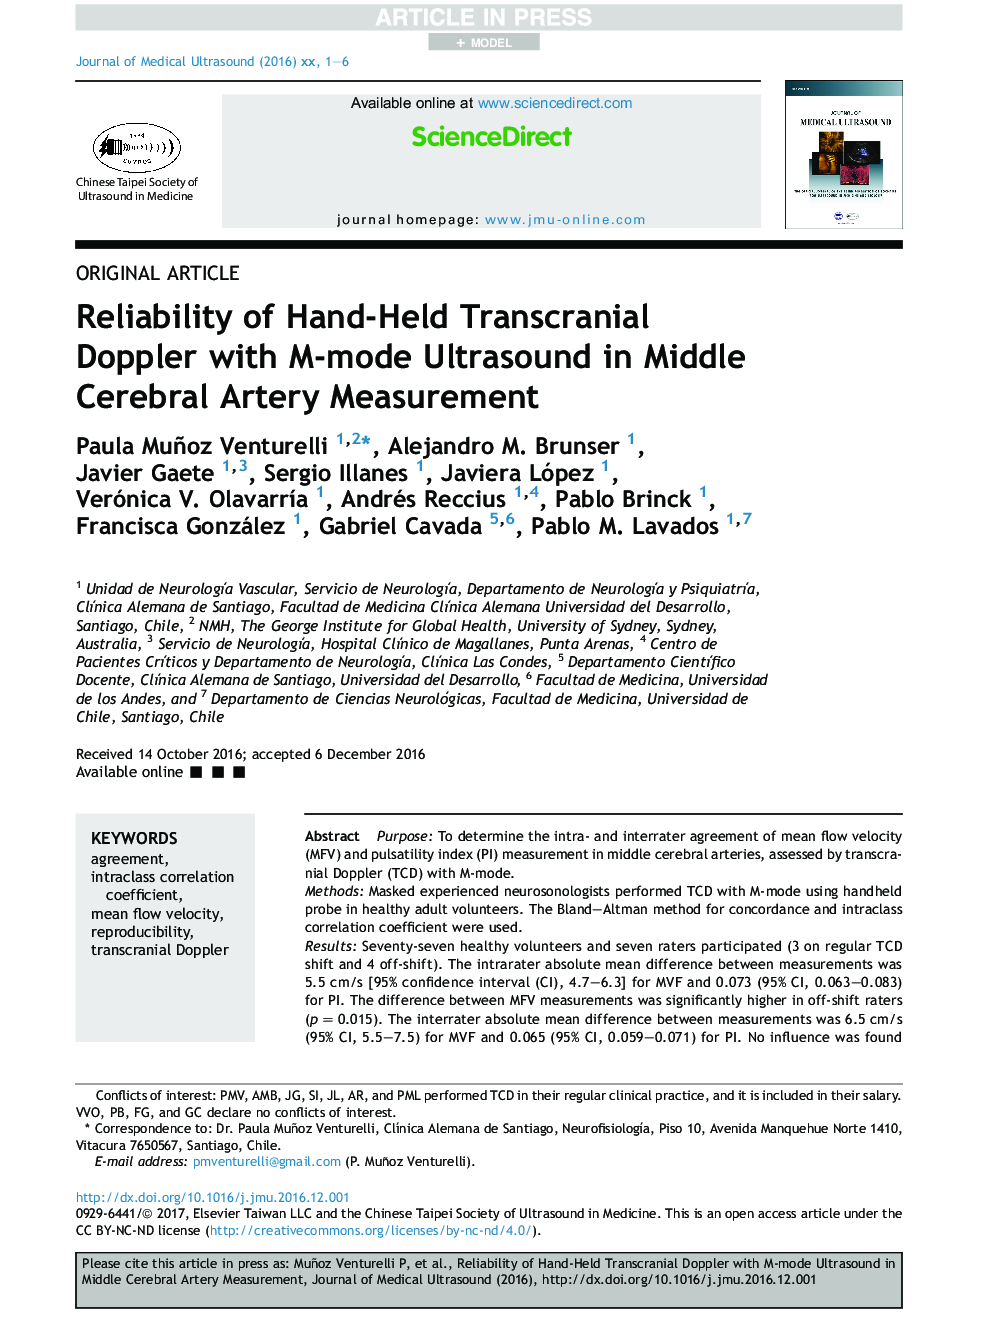 Reliability of Hand-Held Transcranial Doppler with M-mode Ultrasound in Middle Cerebral Artery Measurement